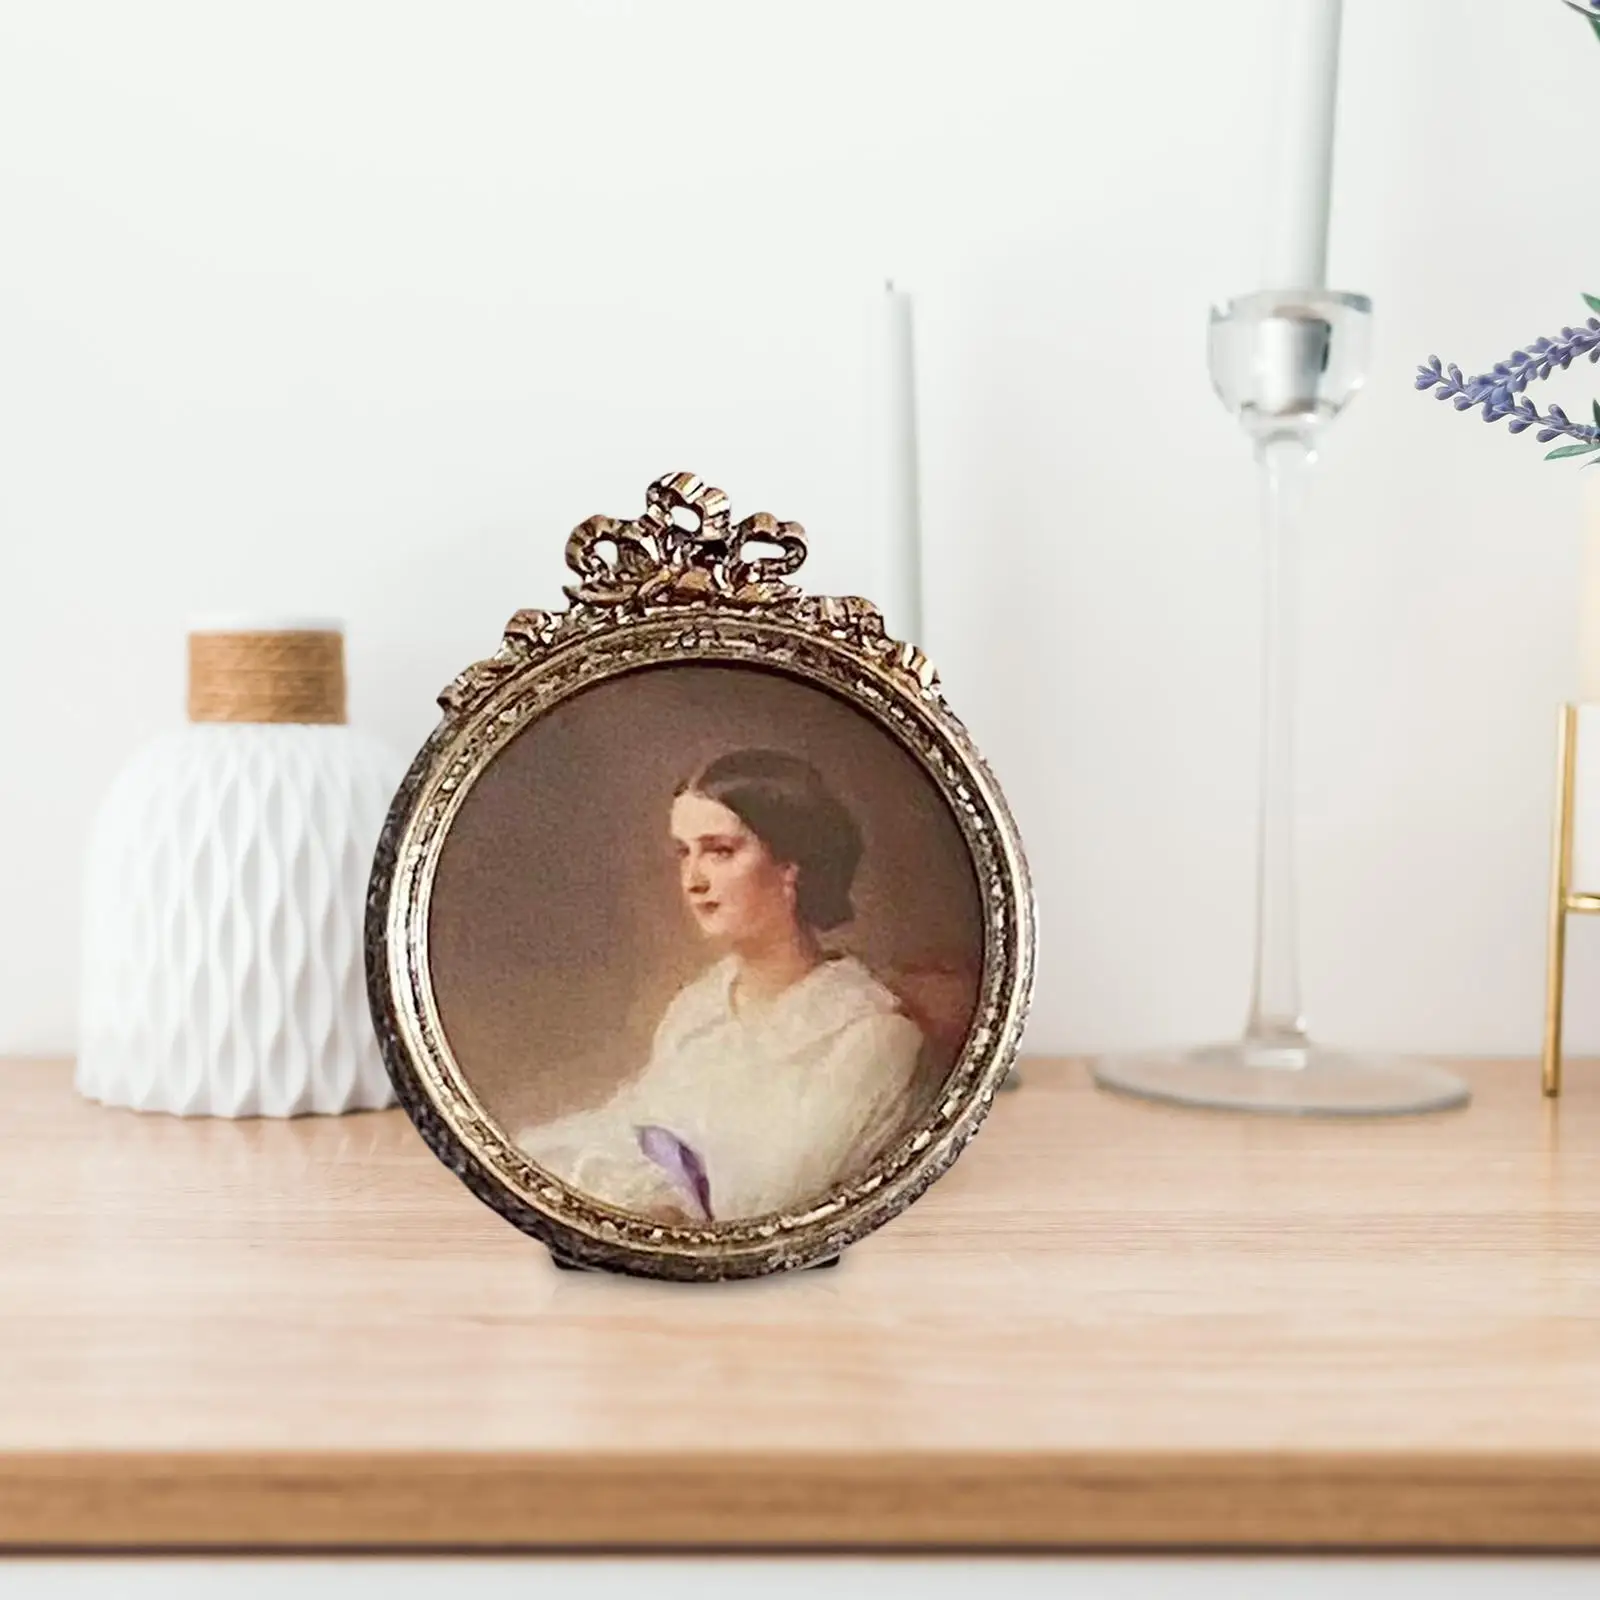 Retro Style of Wall Picture Frame Desktop Vintage Style Photo Frame Pictures Holder for Studio Bedroom Cafe Home Decorations